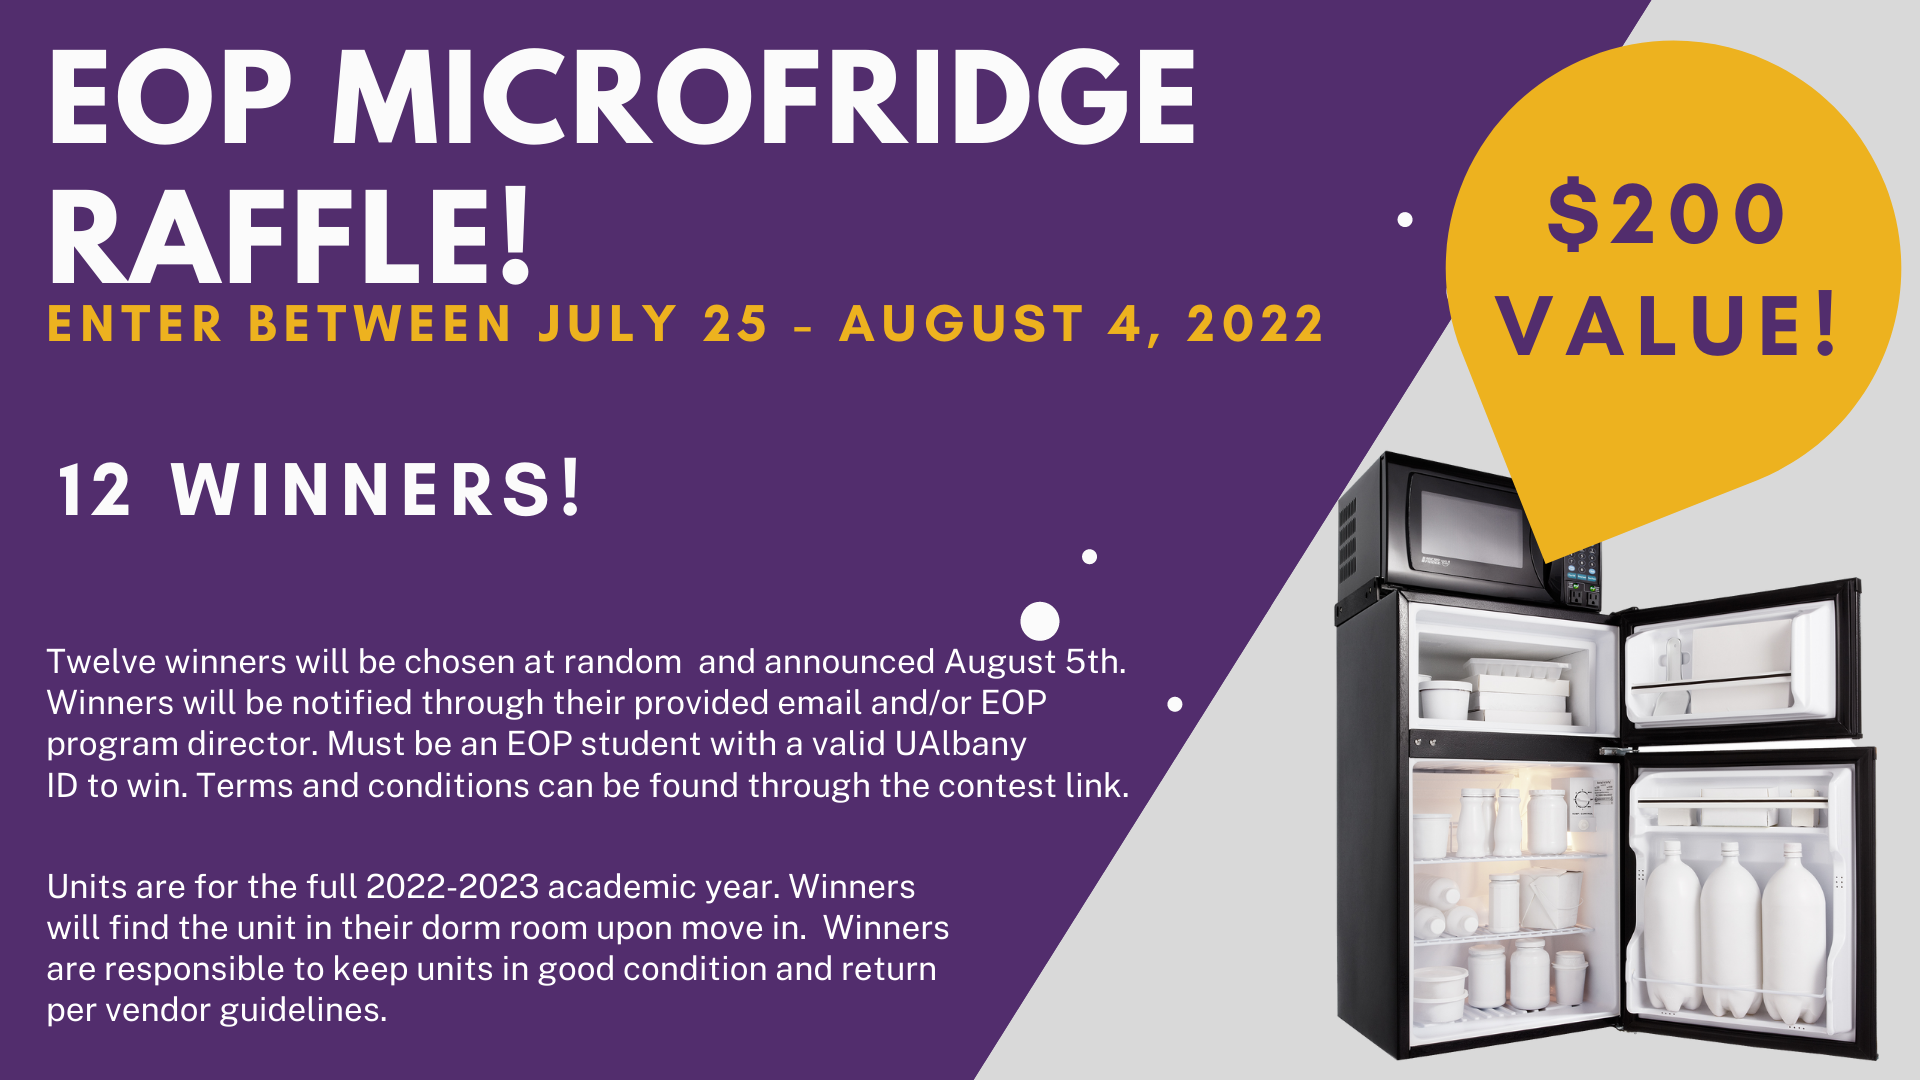 EOP MicroFridge Giveaway. Enter to win by August 5th. 